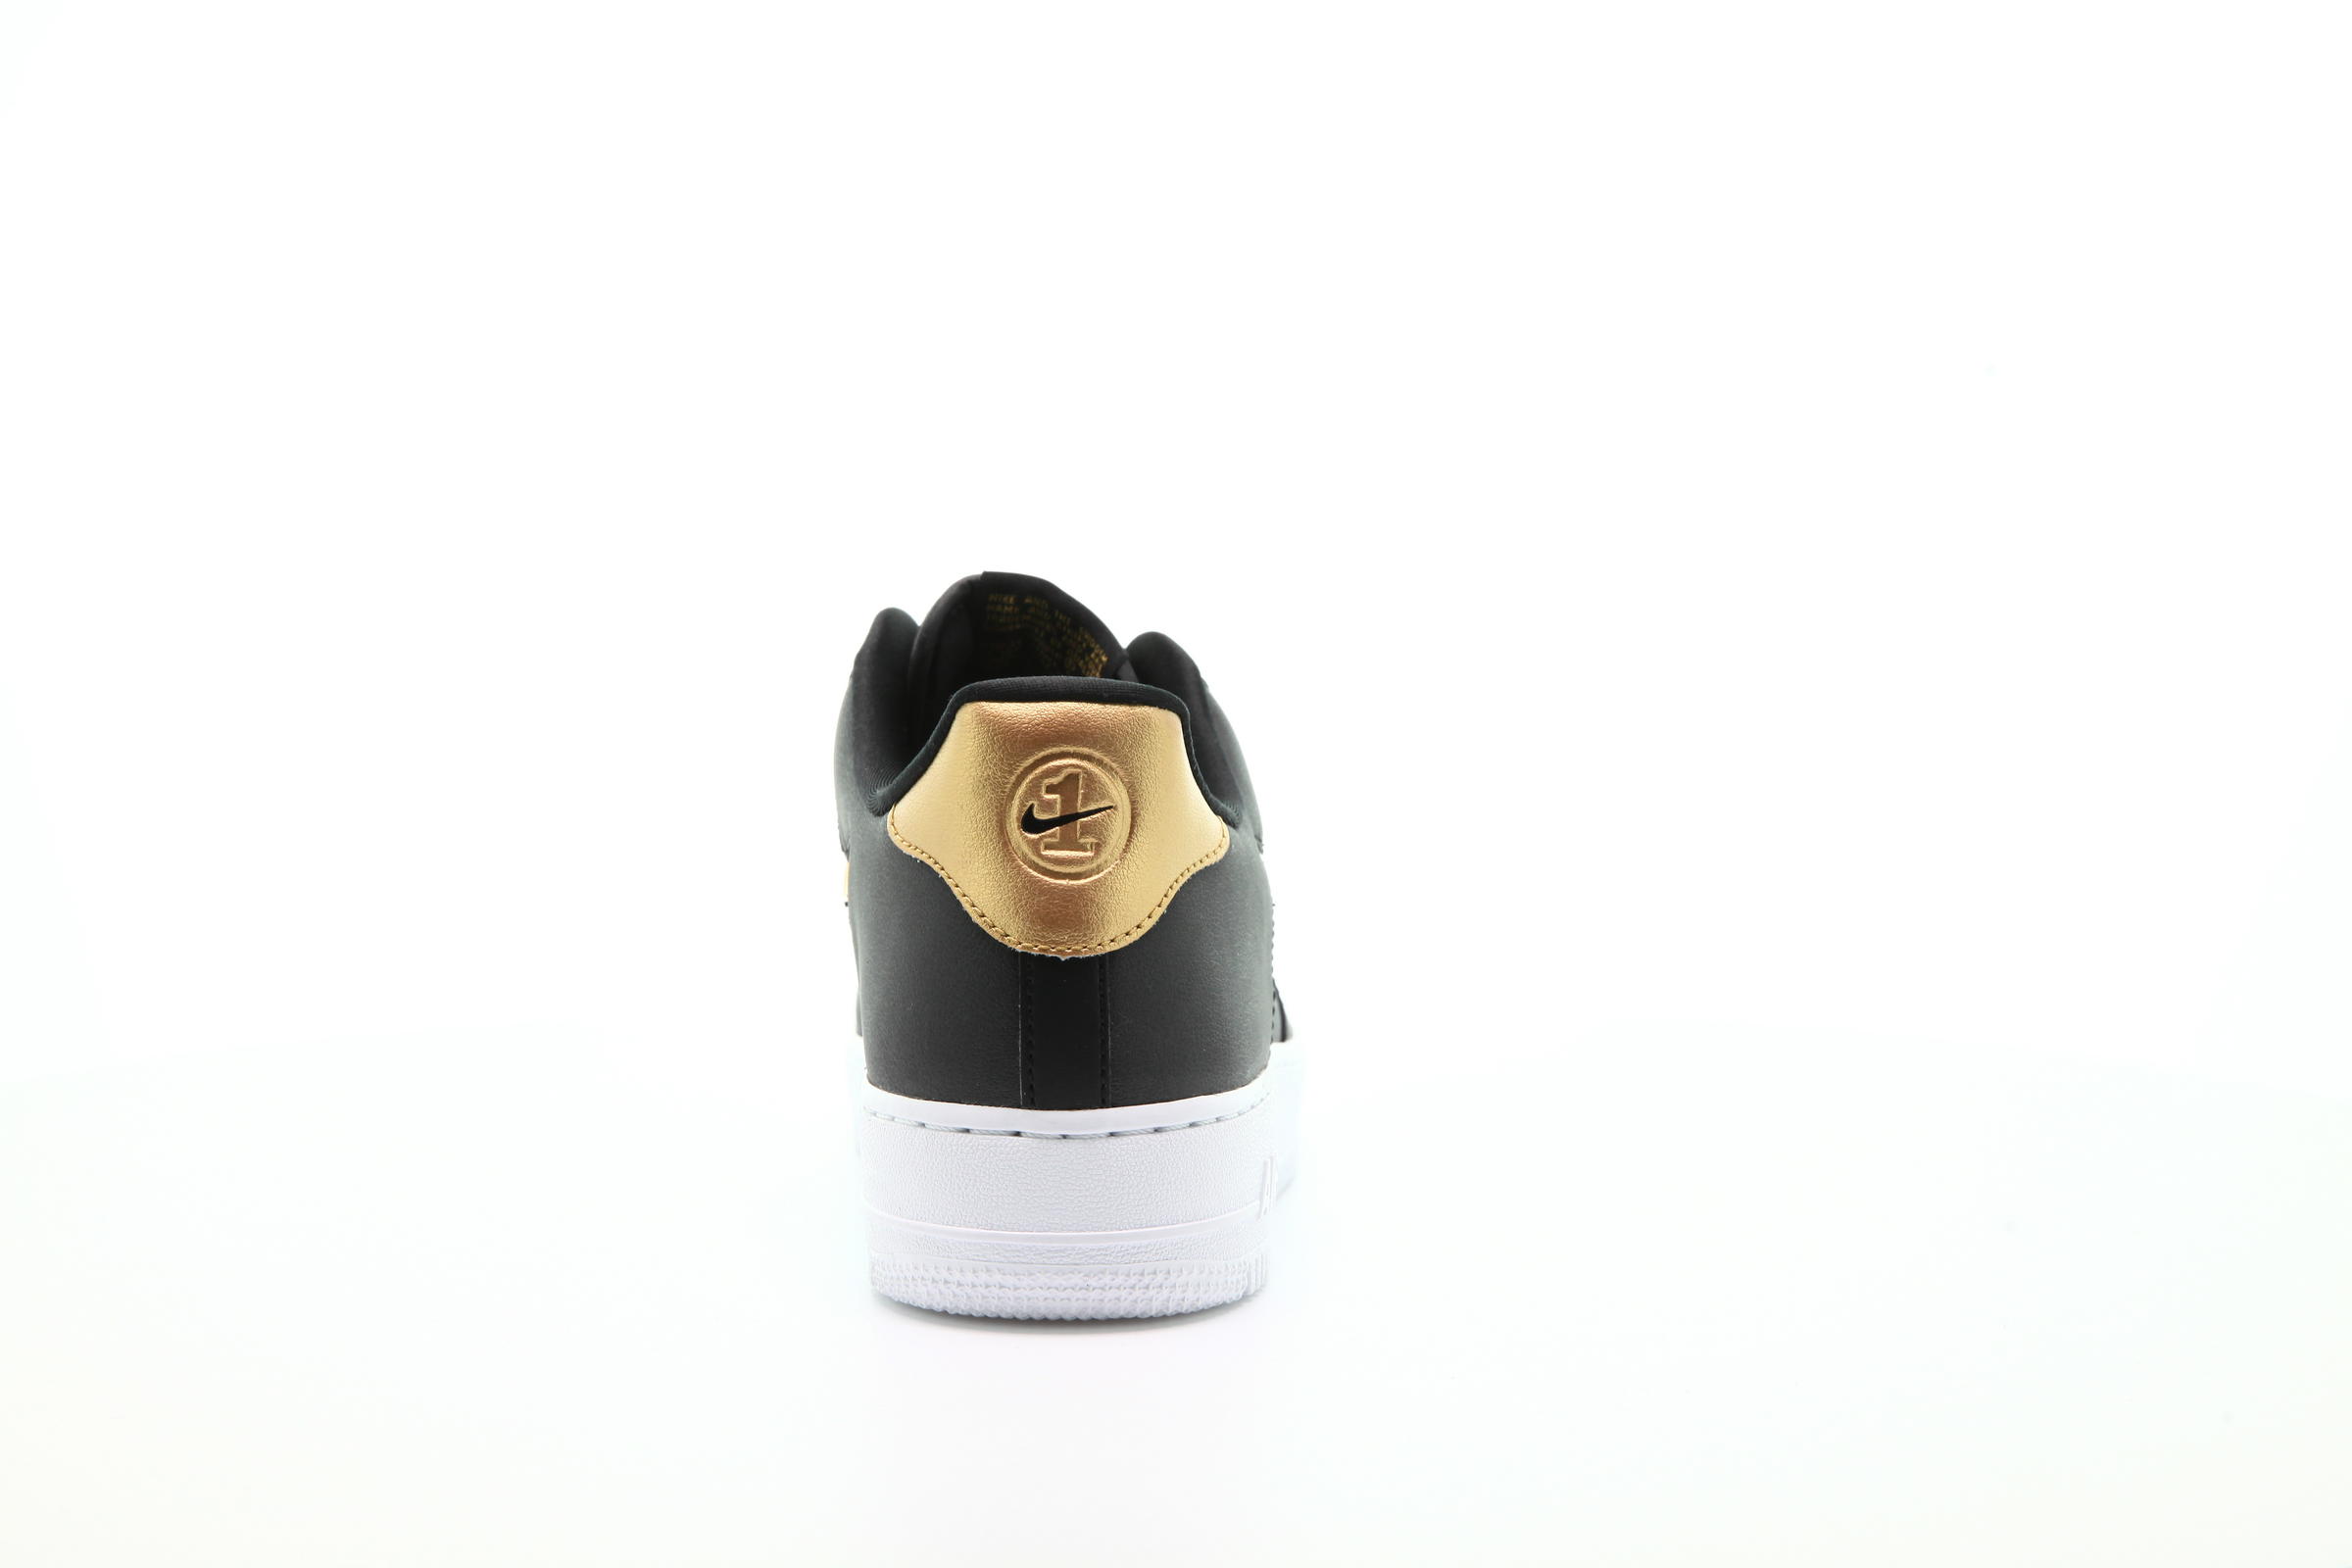 Nike Air Force 1 07 Lv8 Leather "Metallic Gold"